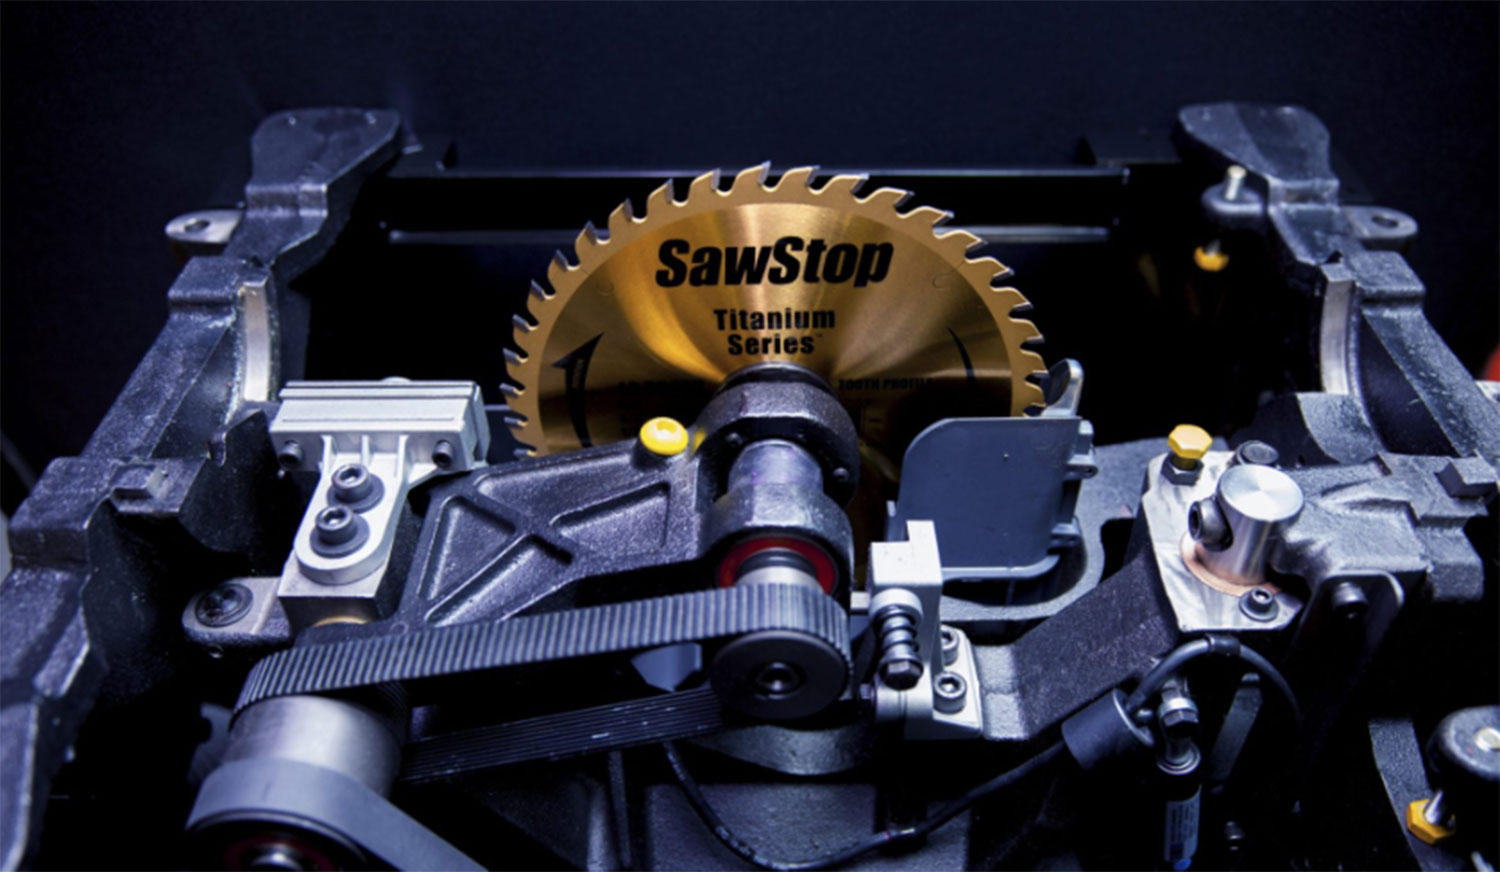 A view under the table of a Sawstop industrial cabinet saw.